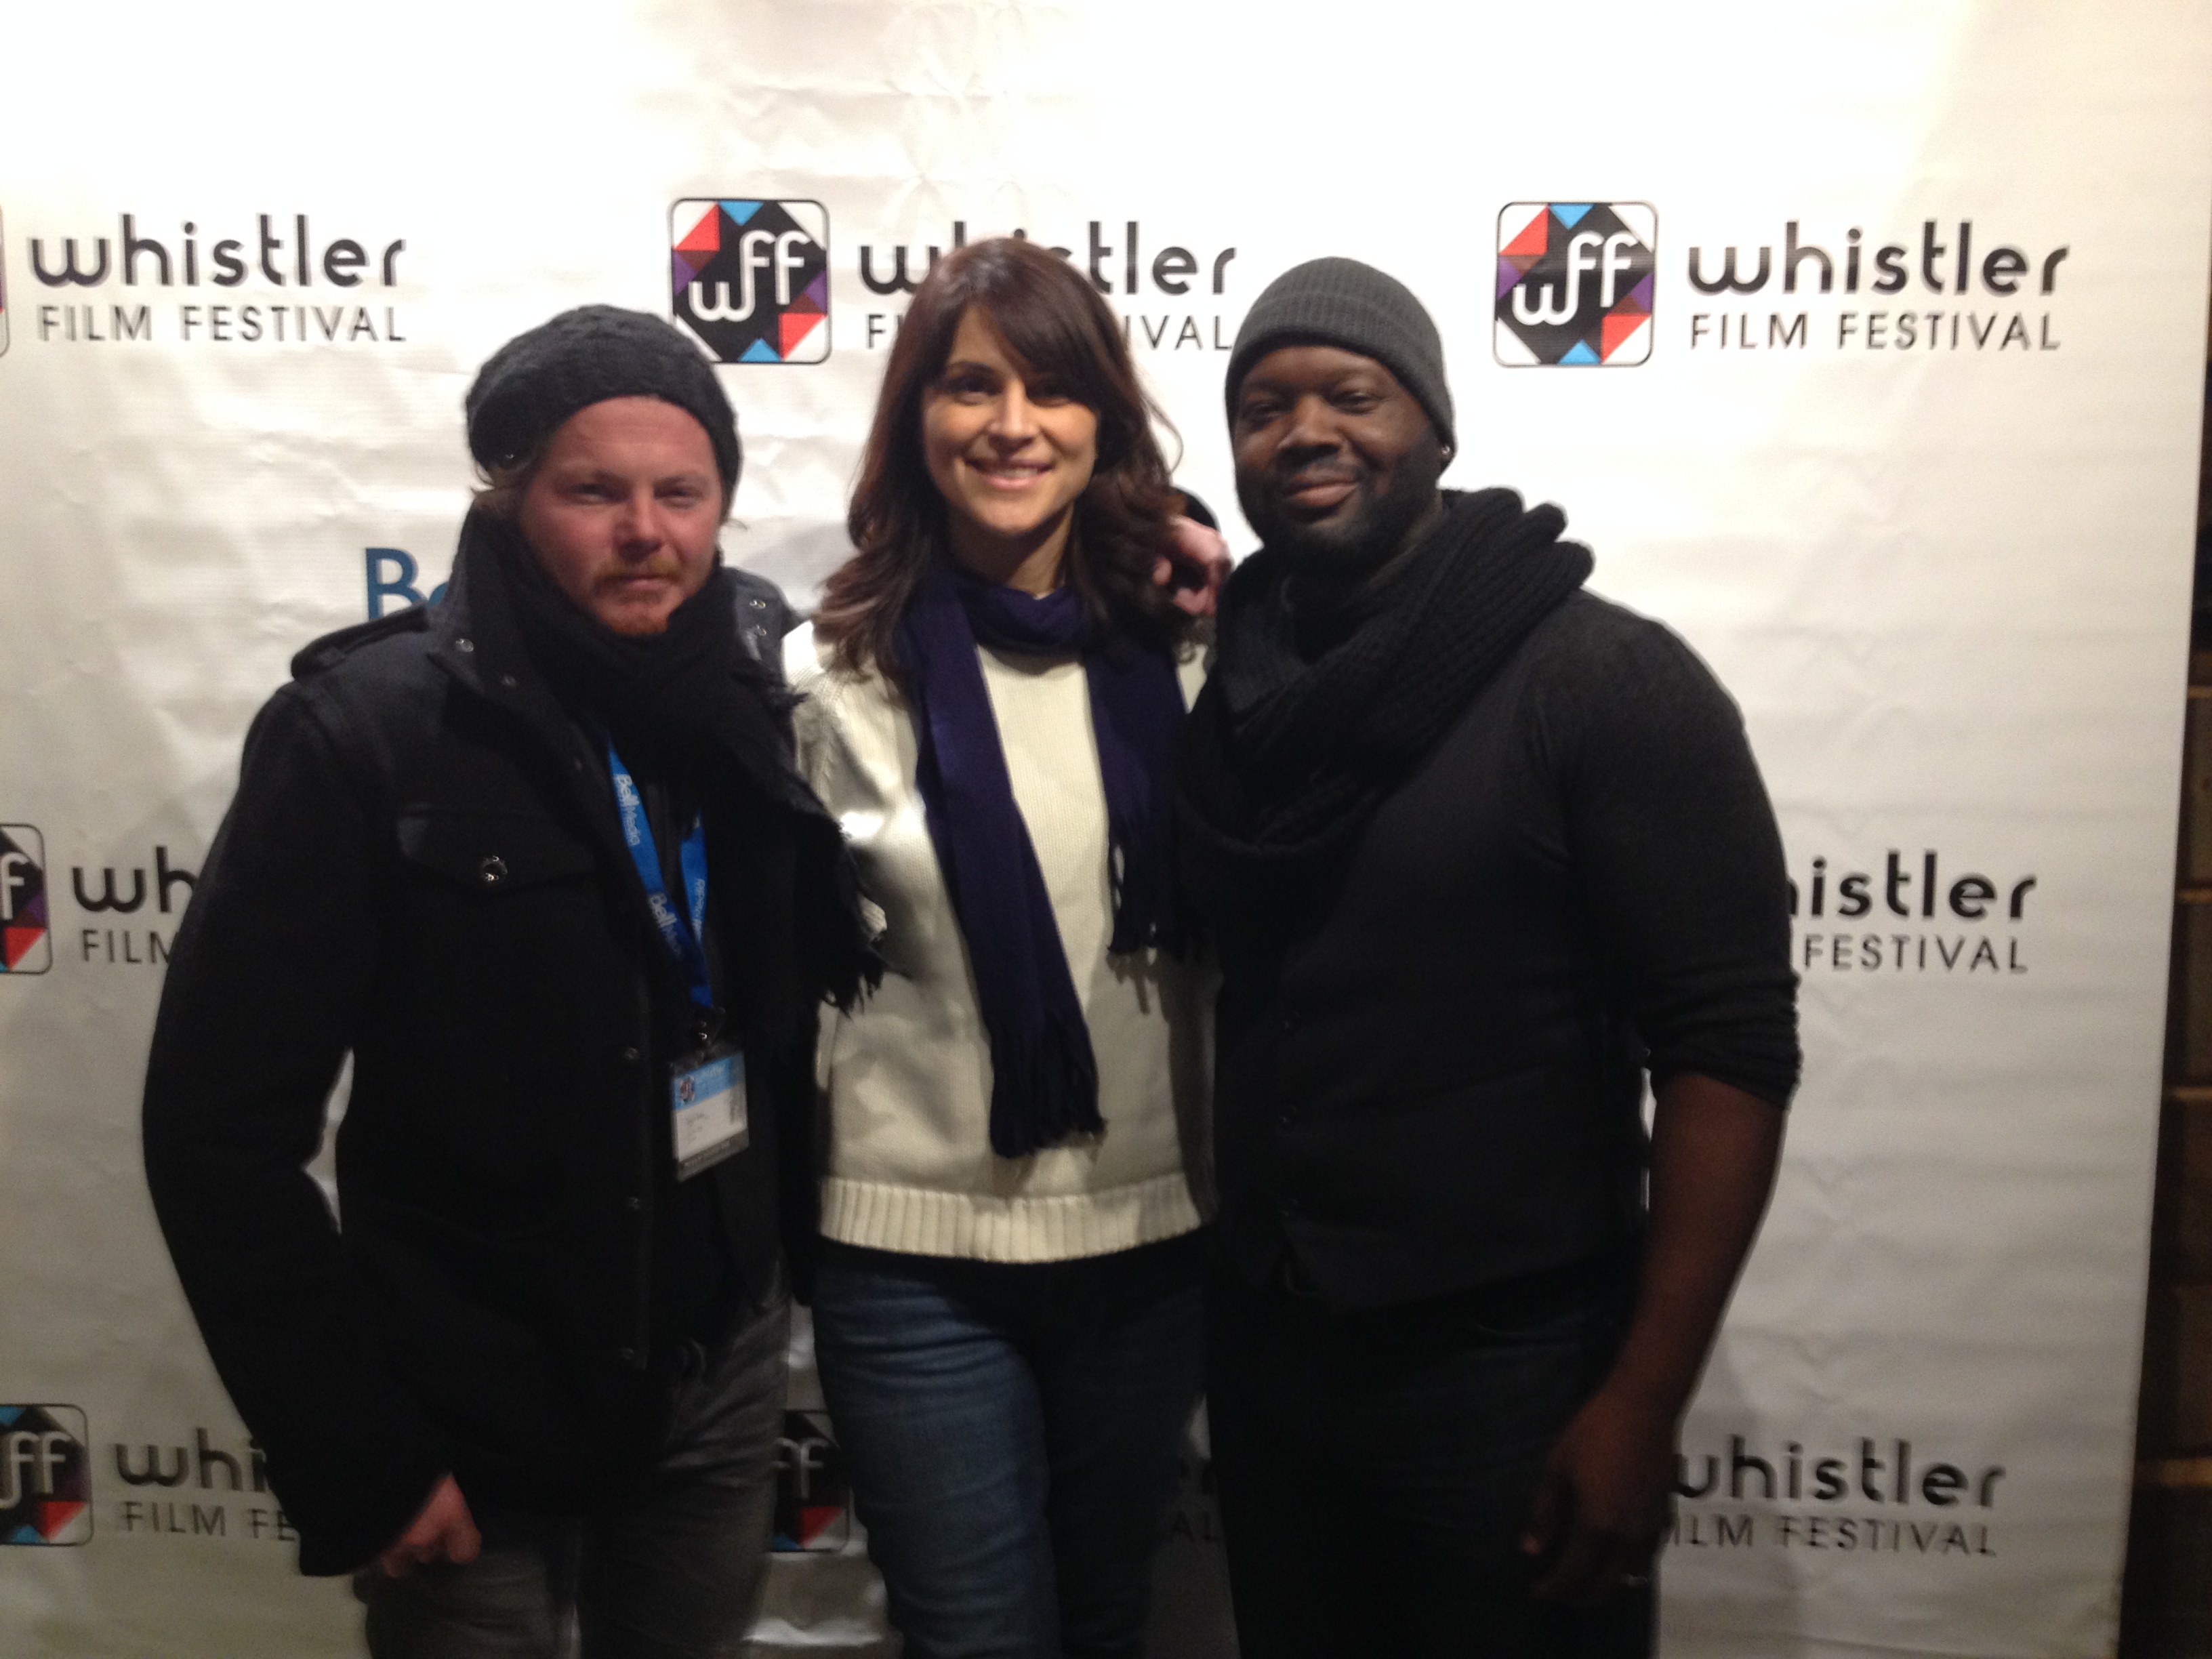 Teach Grant, Paralee Cook and Viv Leacock at the premiere of Down Here at the Whistler Film Festival 2013